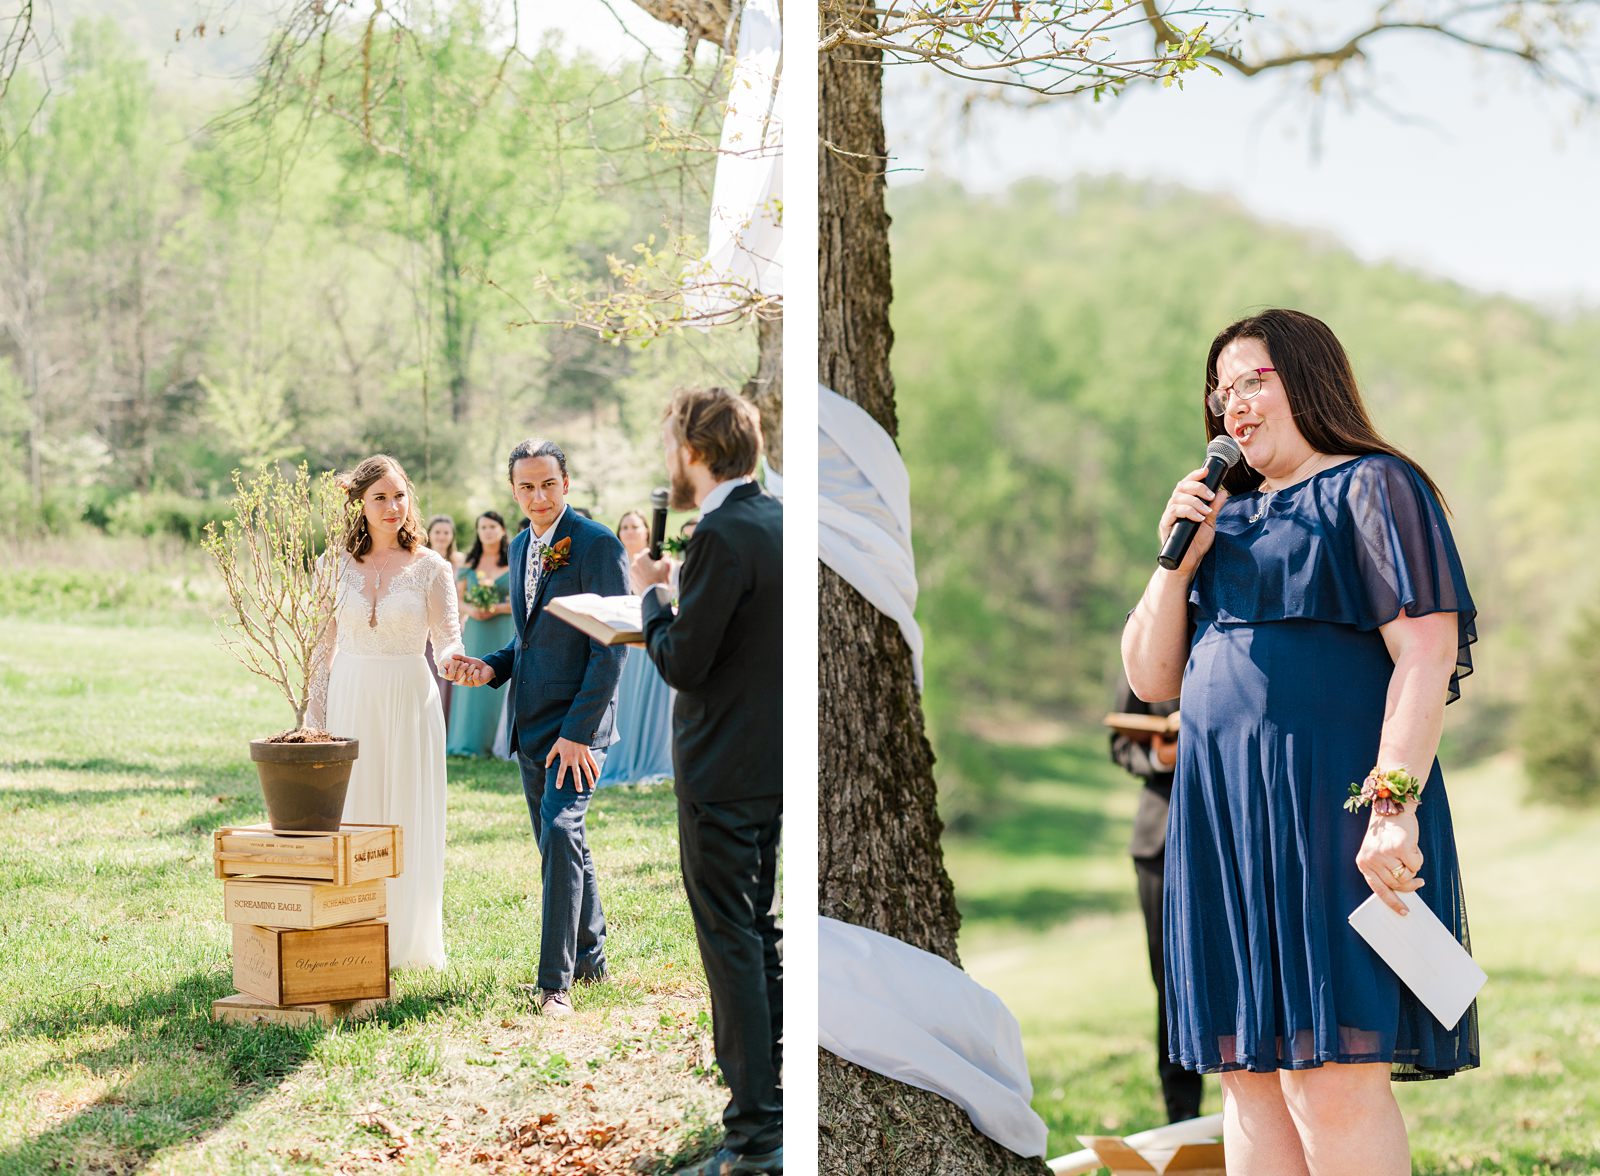 Outdoor Cove Ceremony with Unity Tree at Charlottesville Wedding Virginia Wedding Photographer